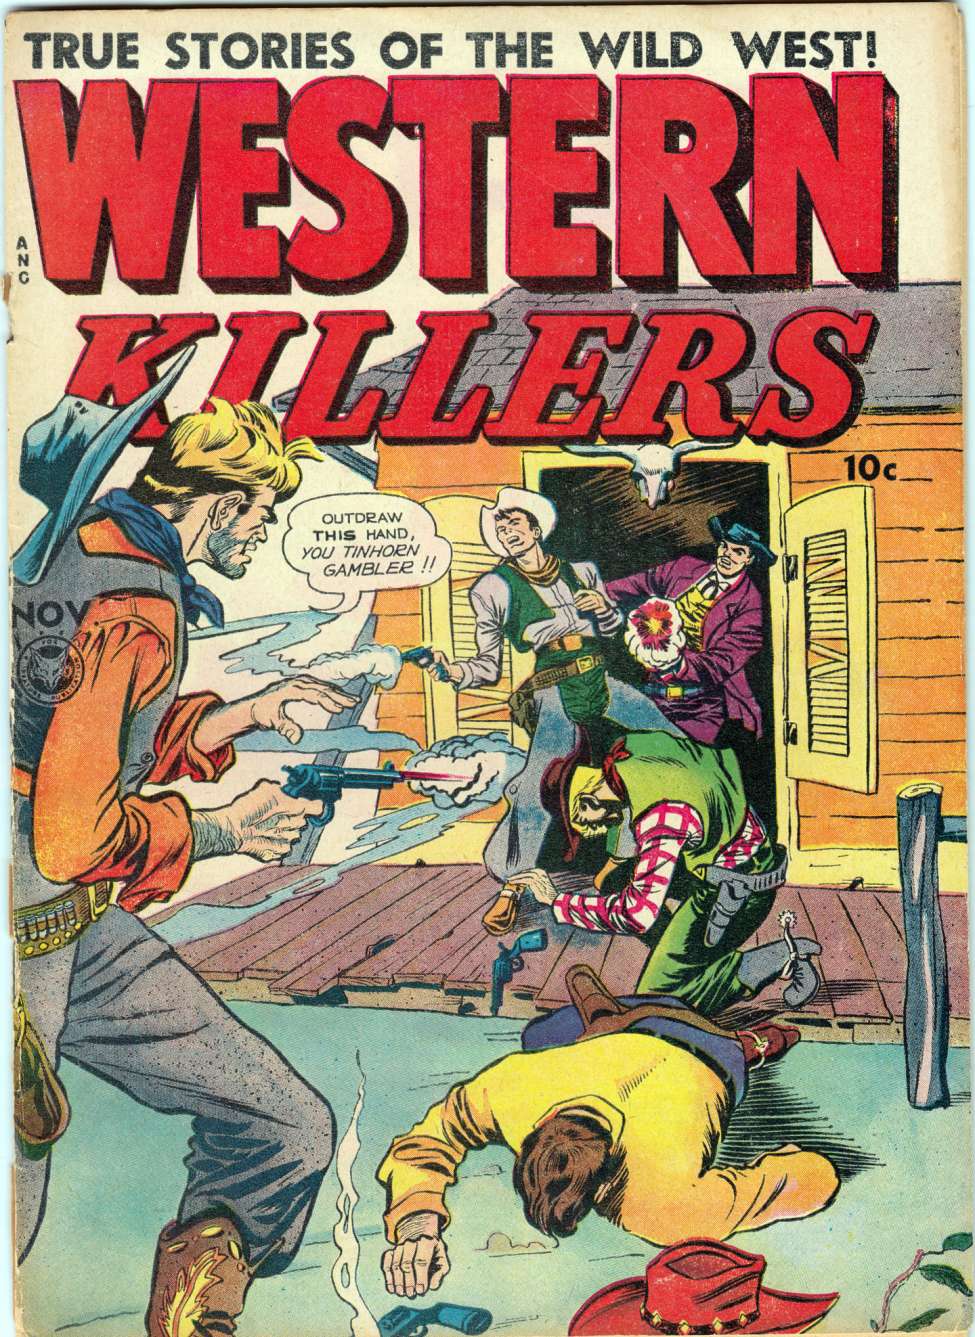 Comic Book Cover For Western Killers 61 (alt) - Version 2